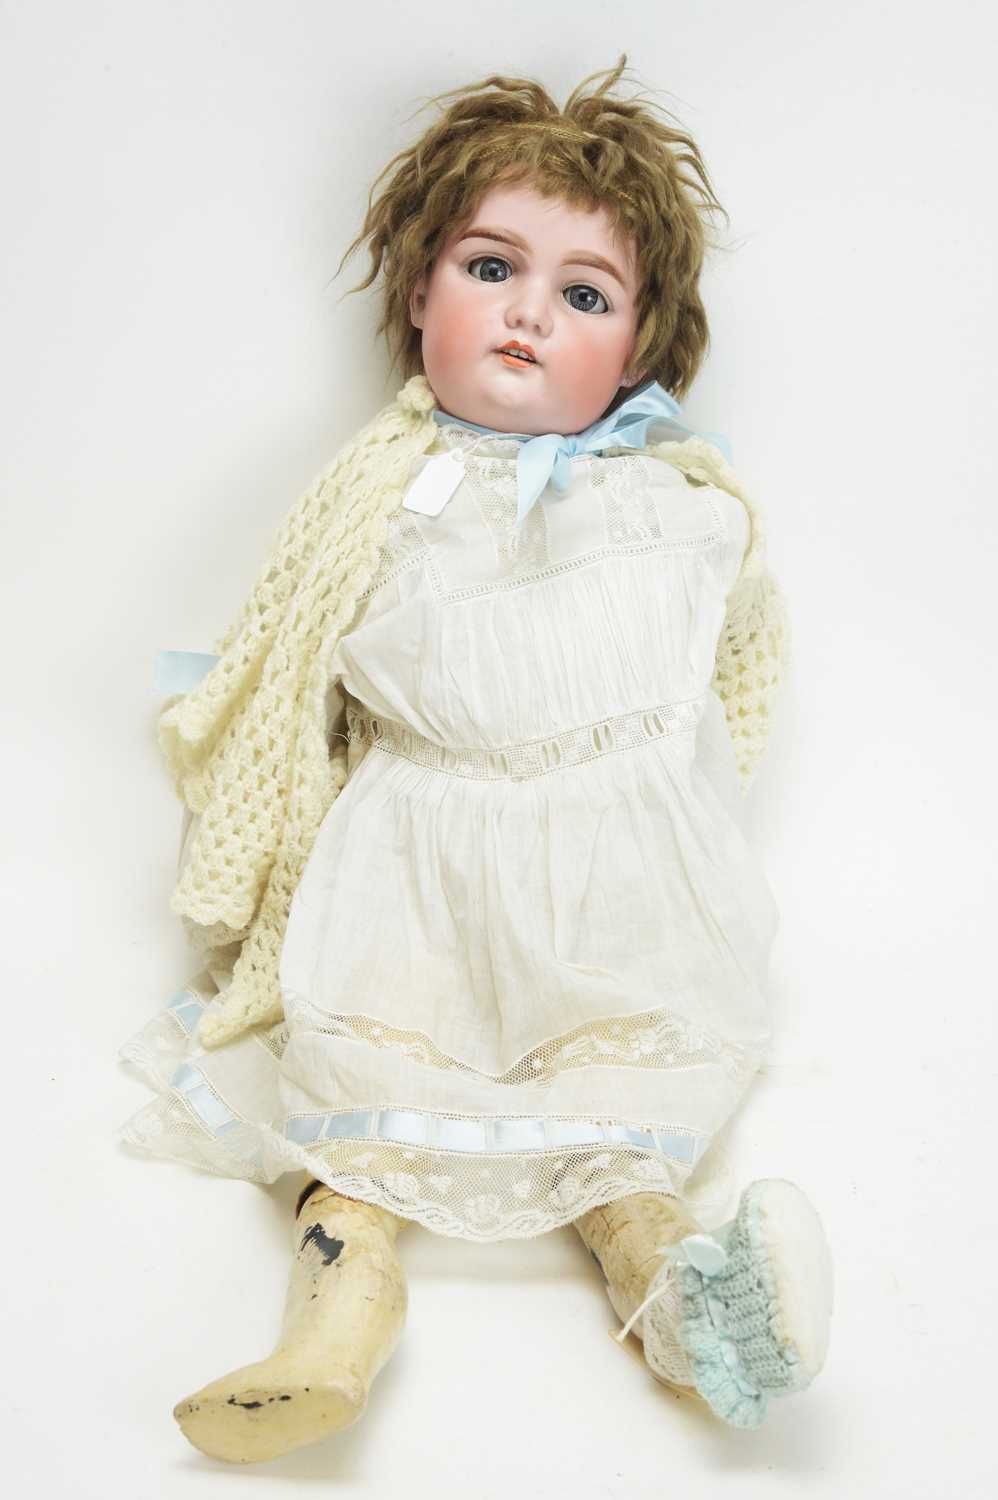 Lot 1043 - Armand Marseille, Germany: a late 19th Century bisque head doll 'No. 14'.